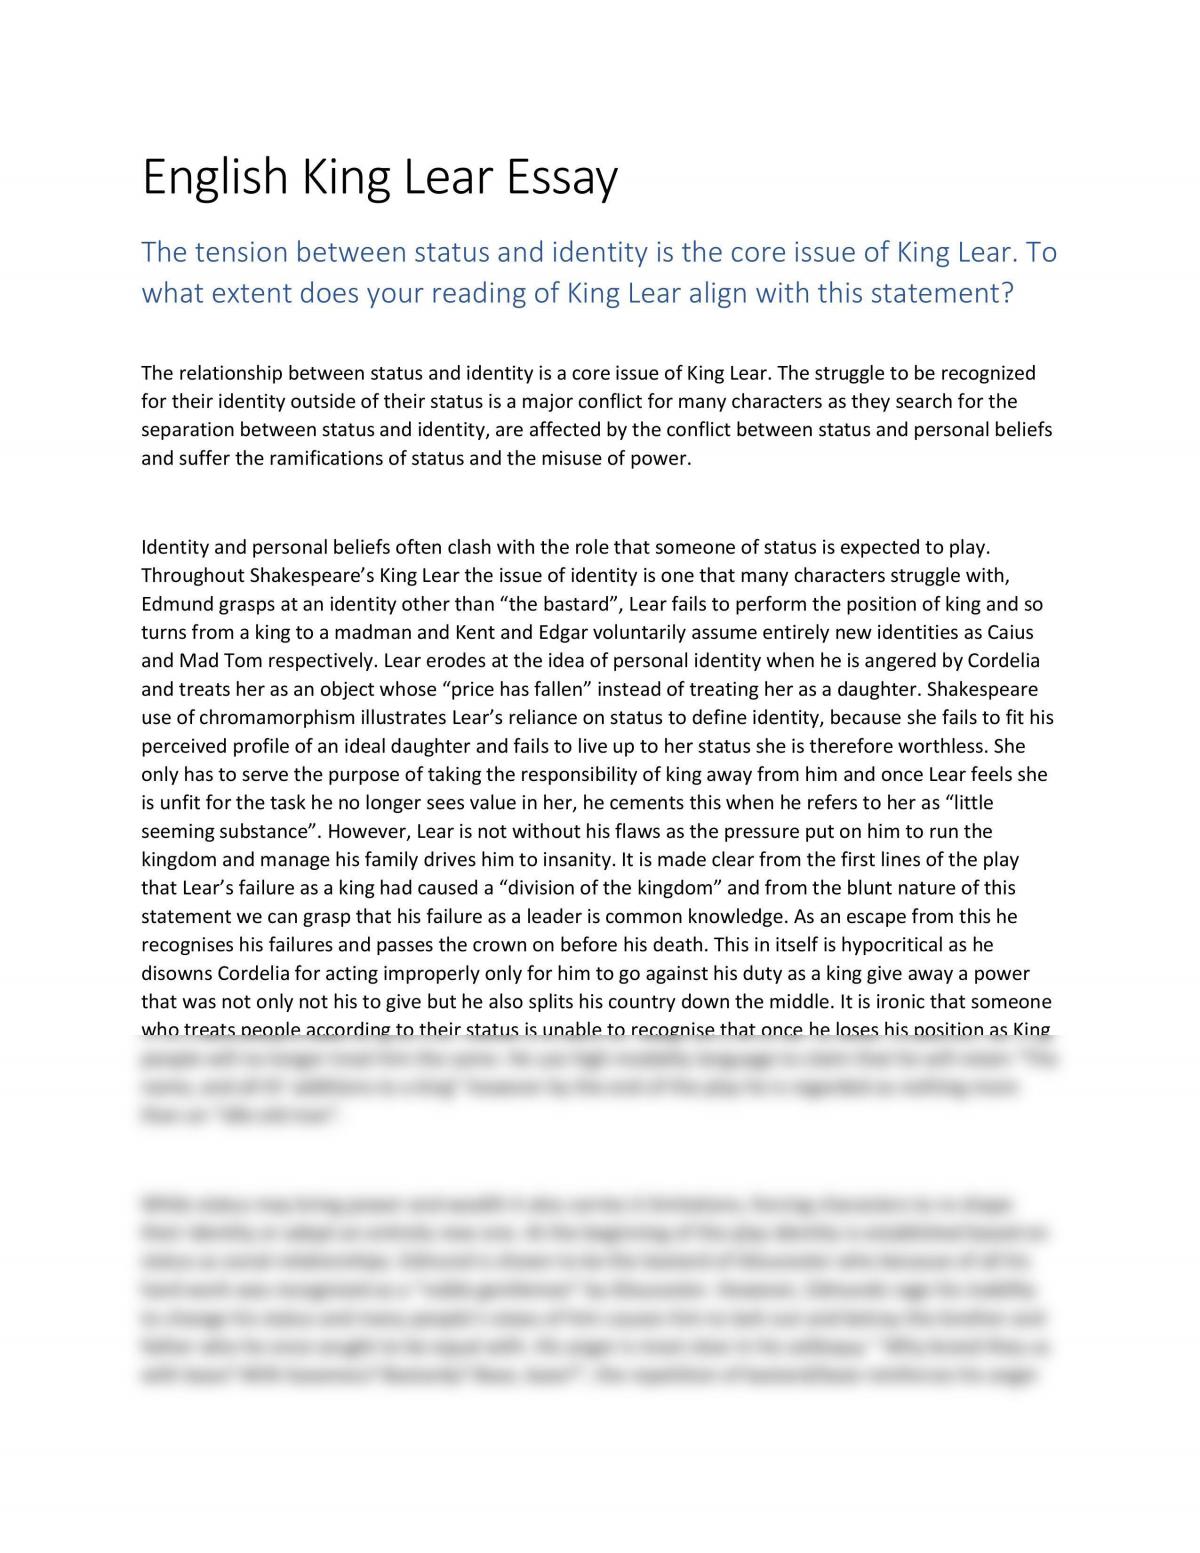 thesis statement for king lear essay